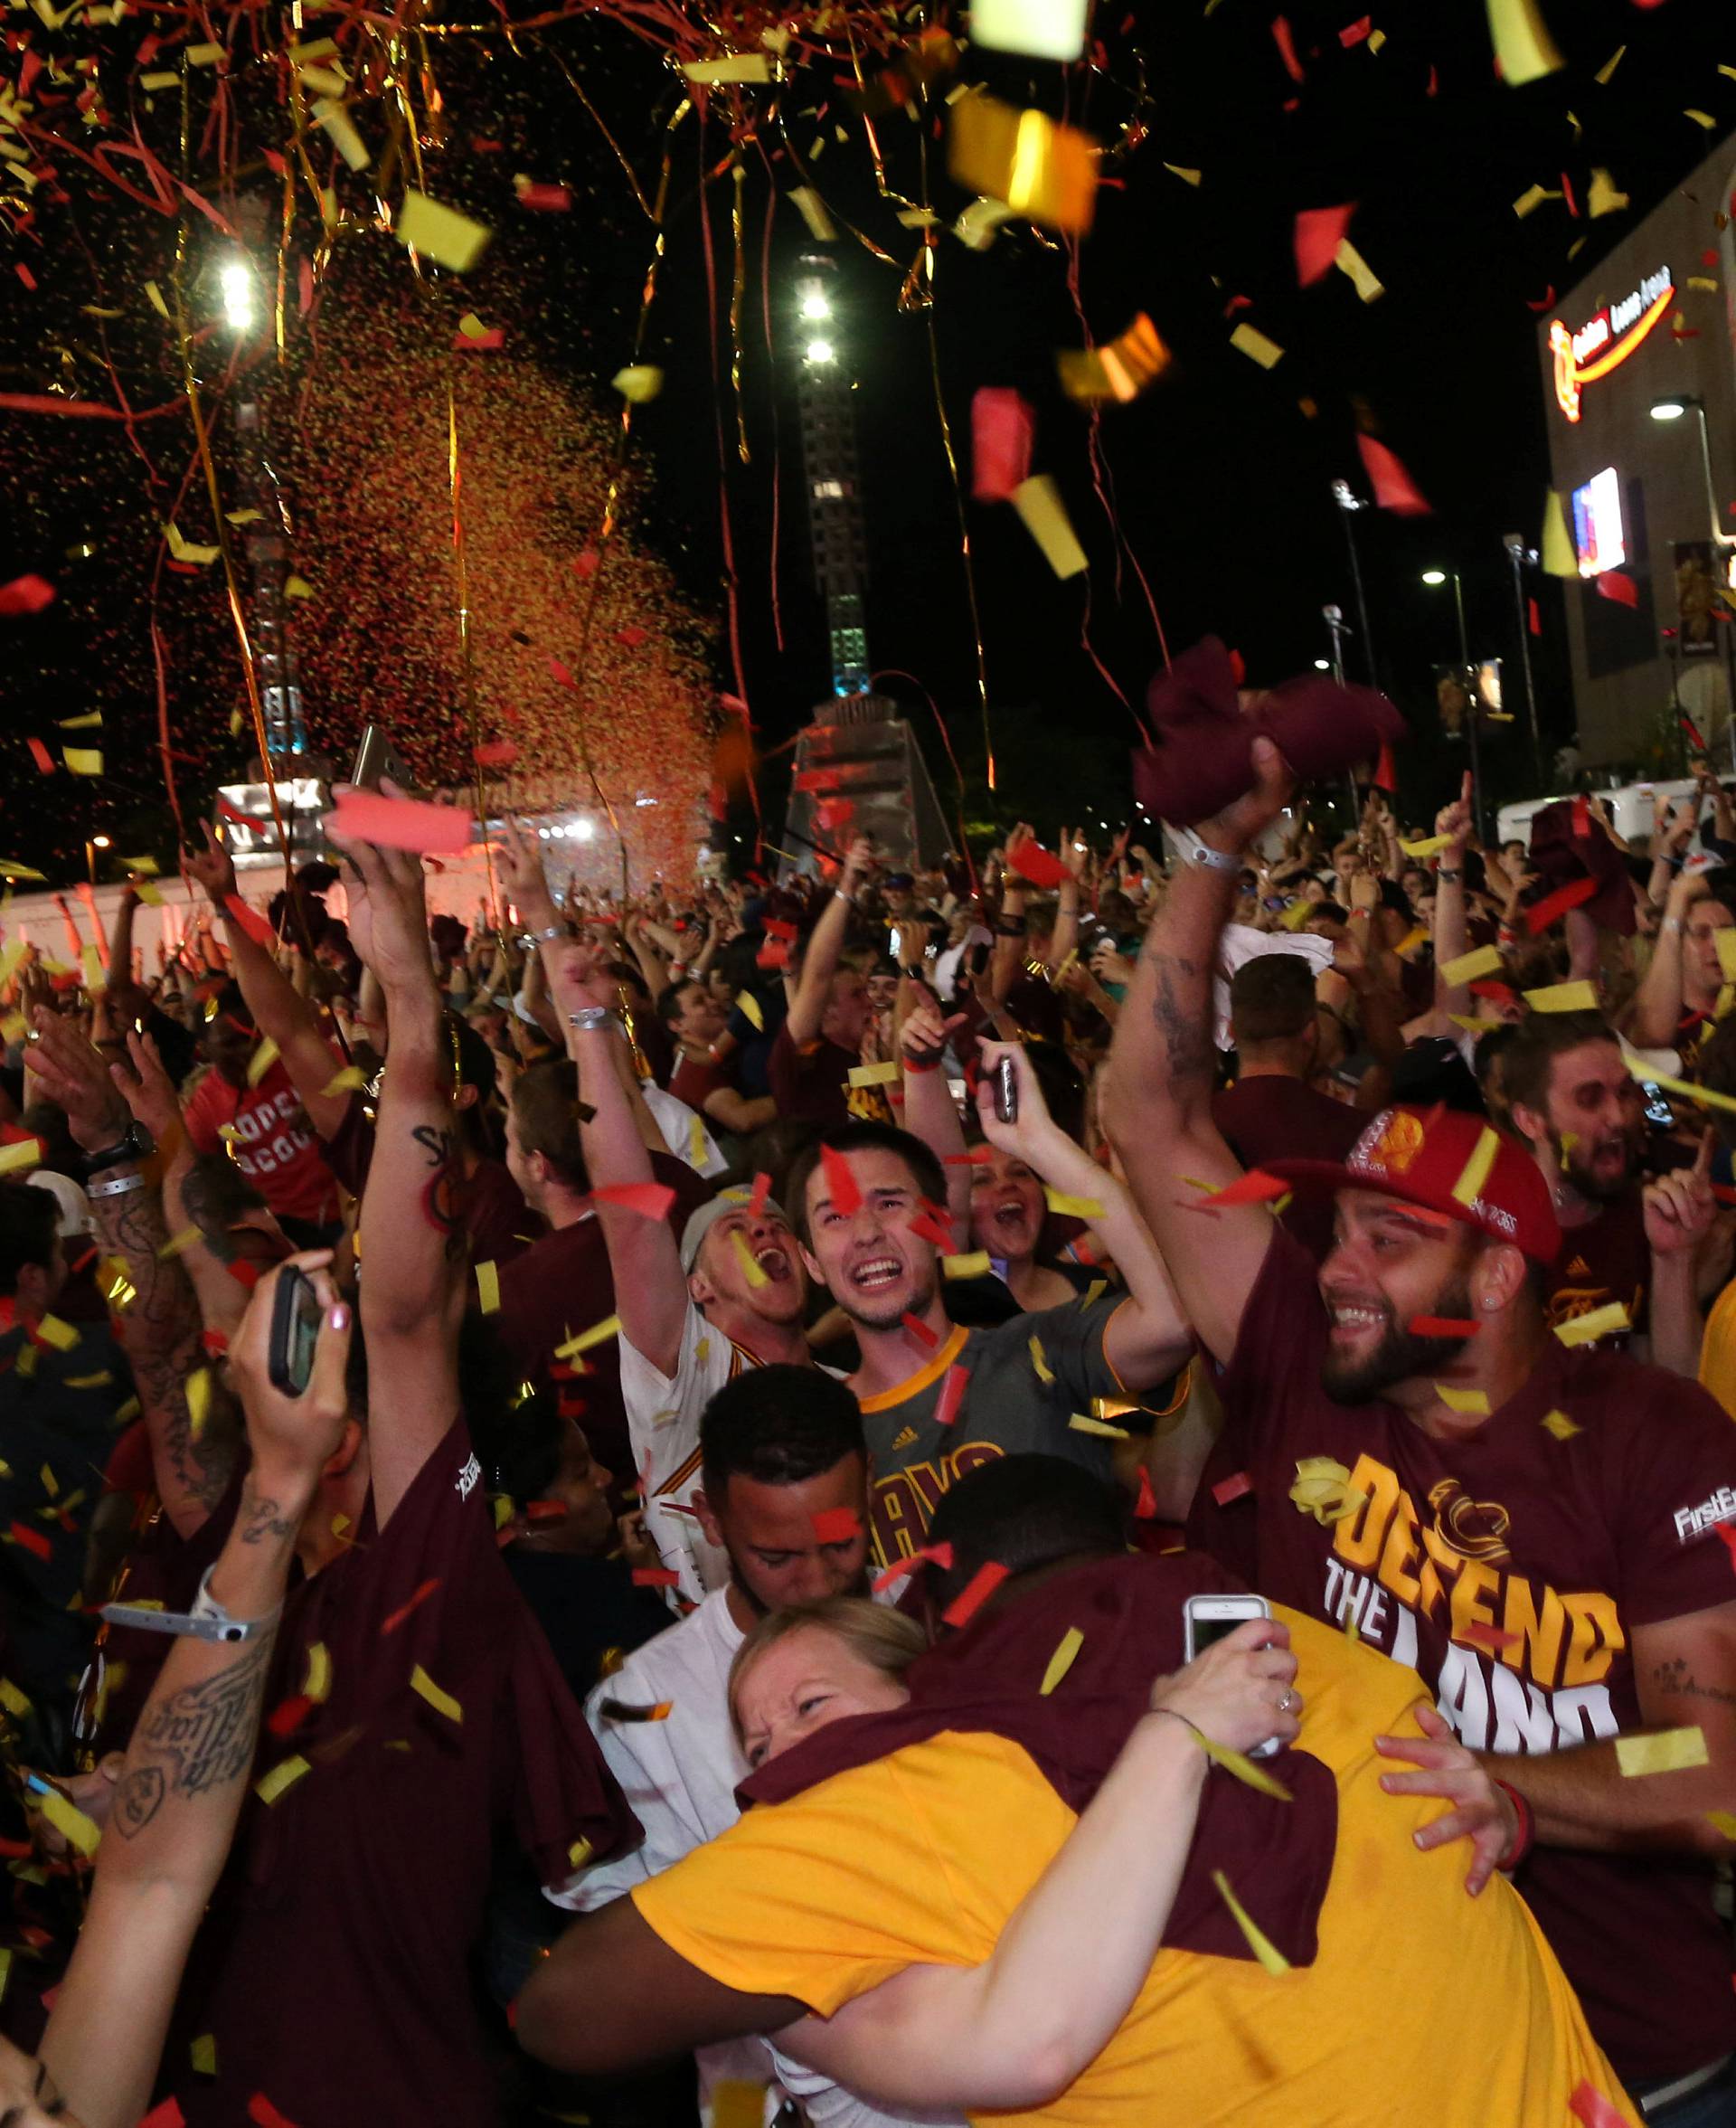 Cleveland Cavaliers rejoice at a watch party outside of Quicken Loans Arena in Cleveland